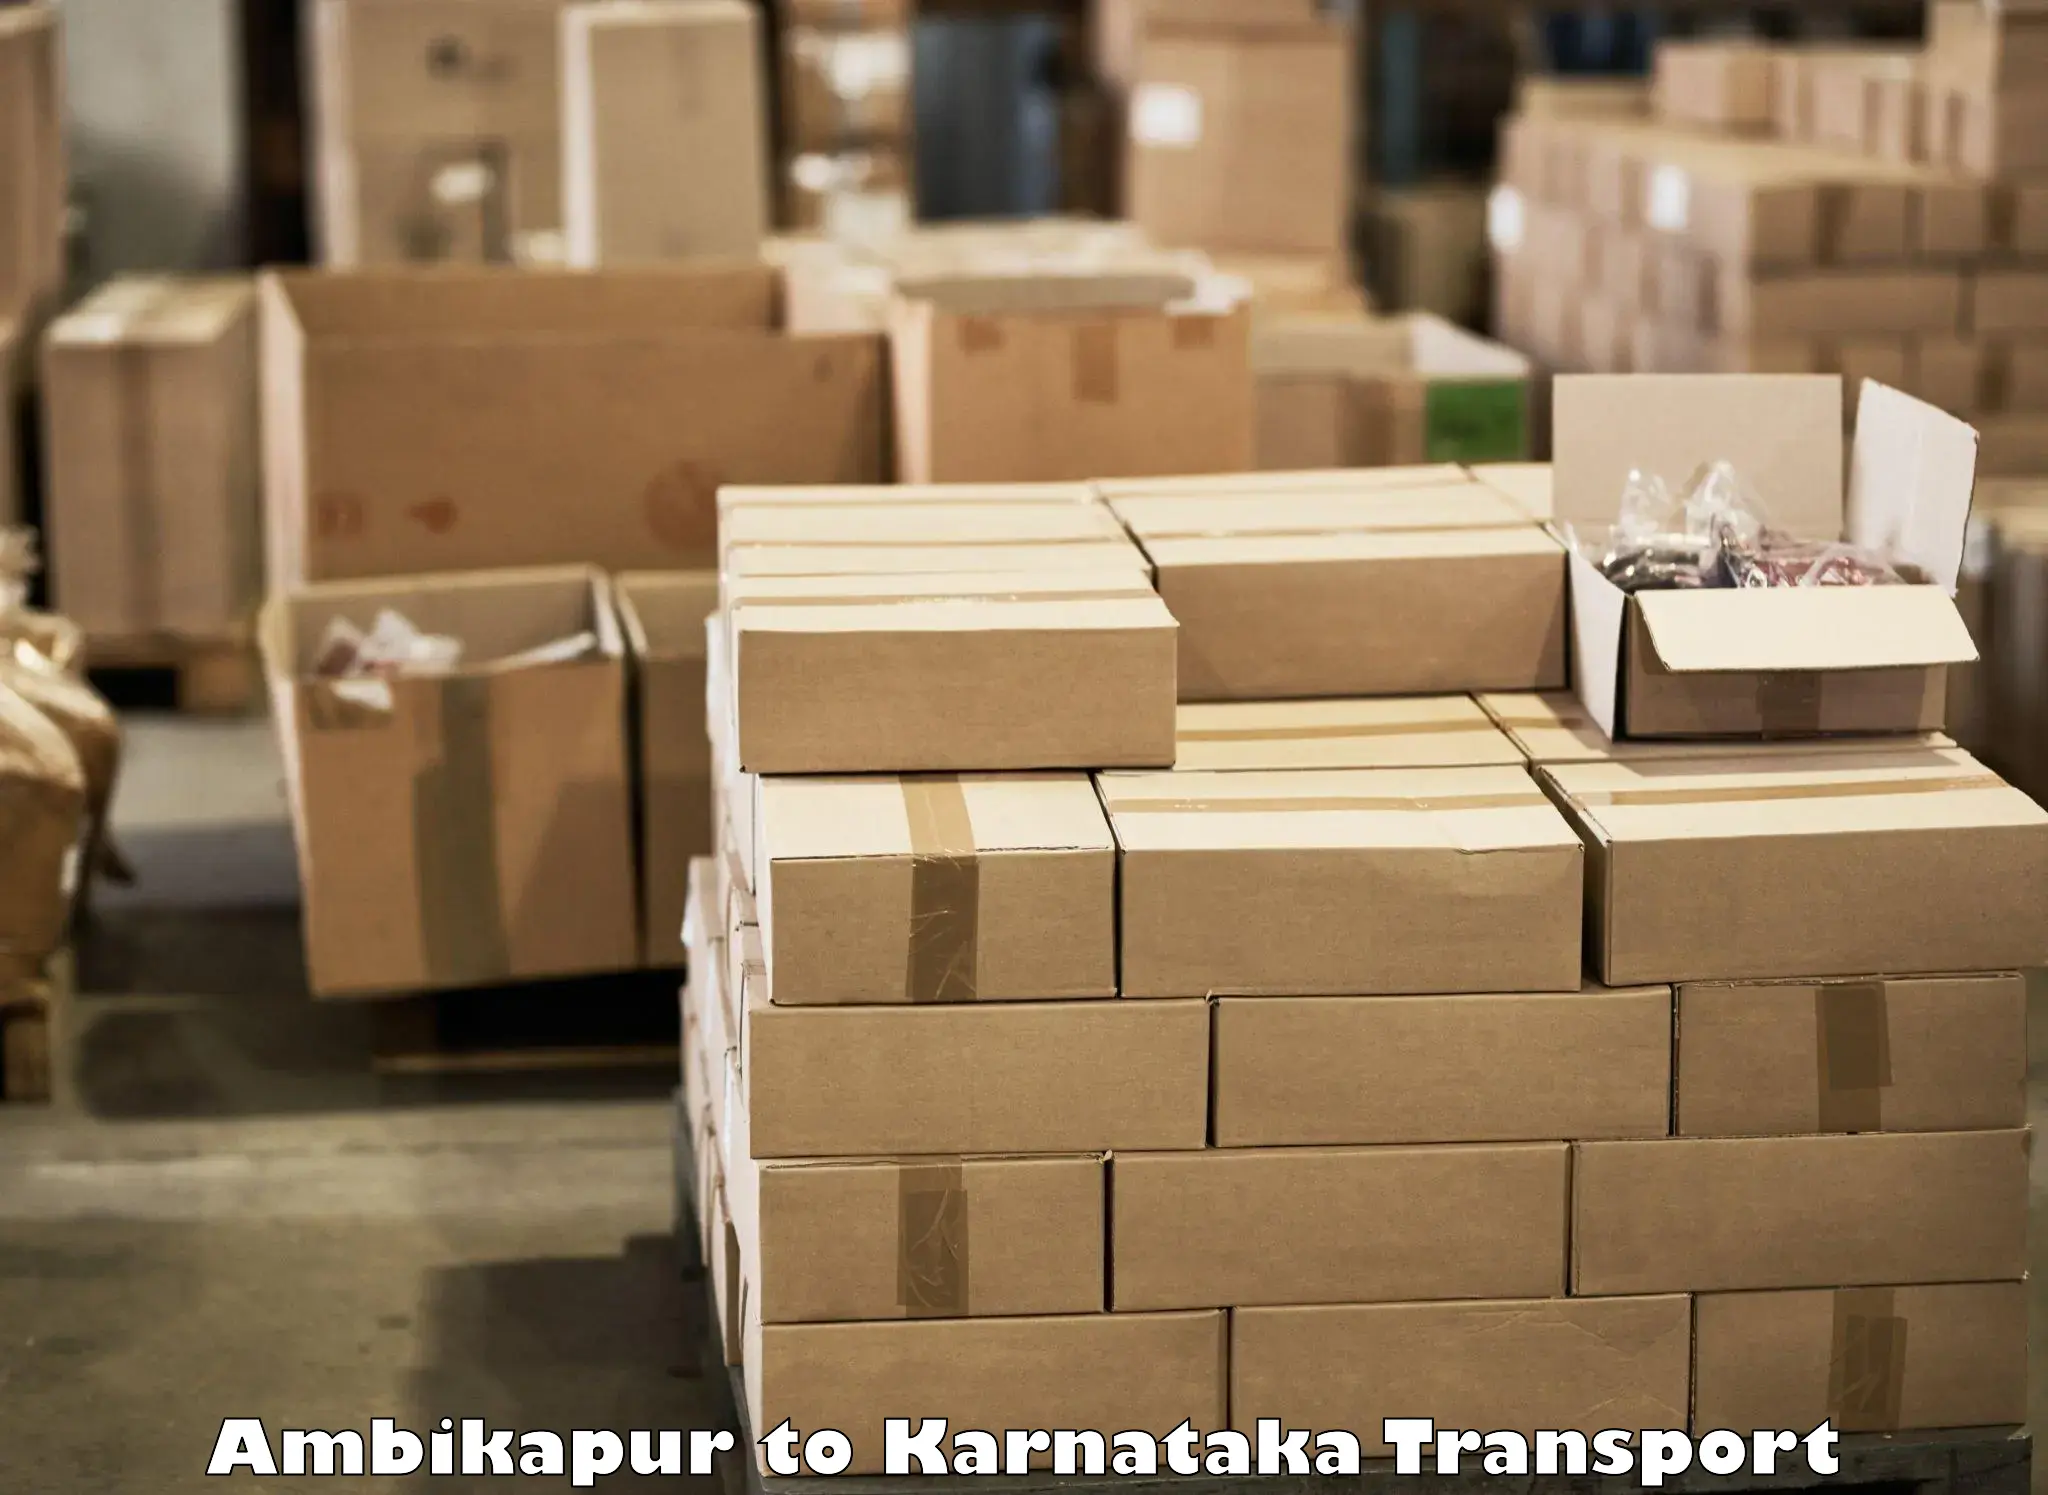 Container transport service in Ambikapur to Mundgod